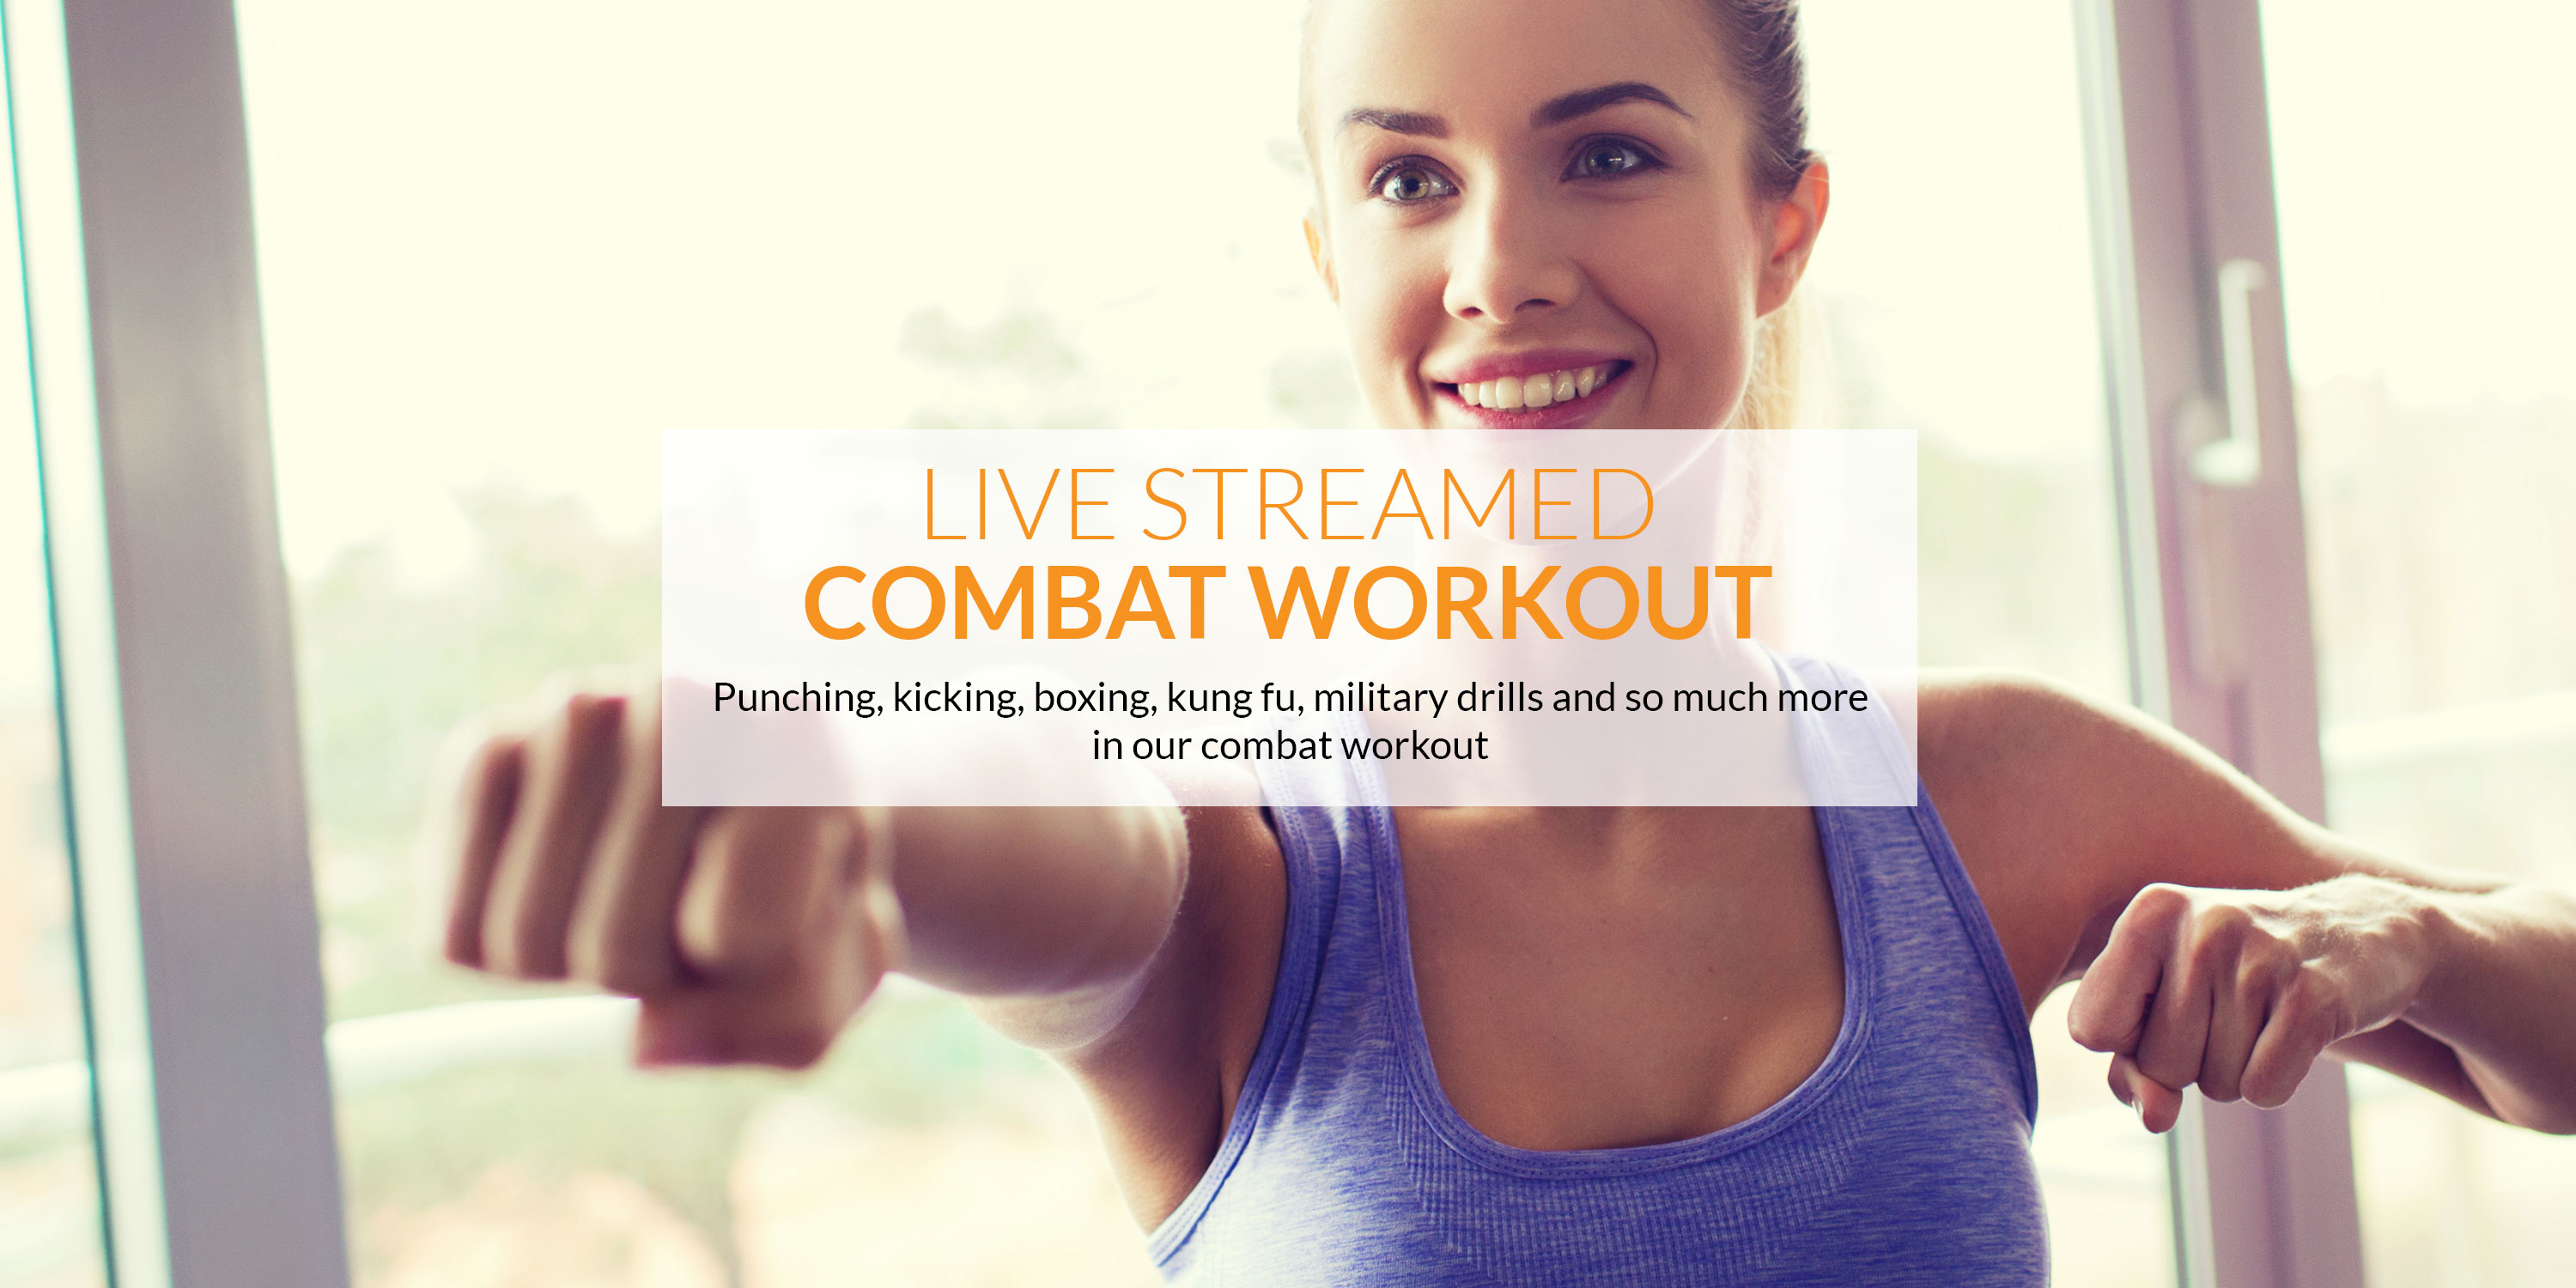 The best Combat Workout live-streamed